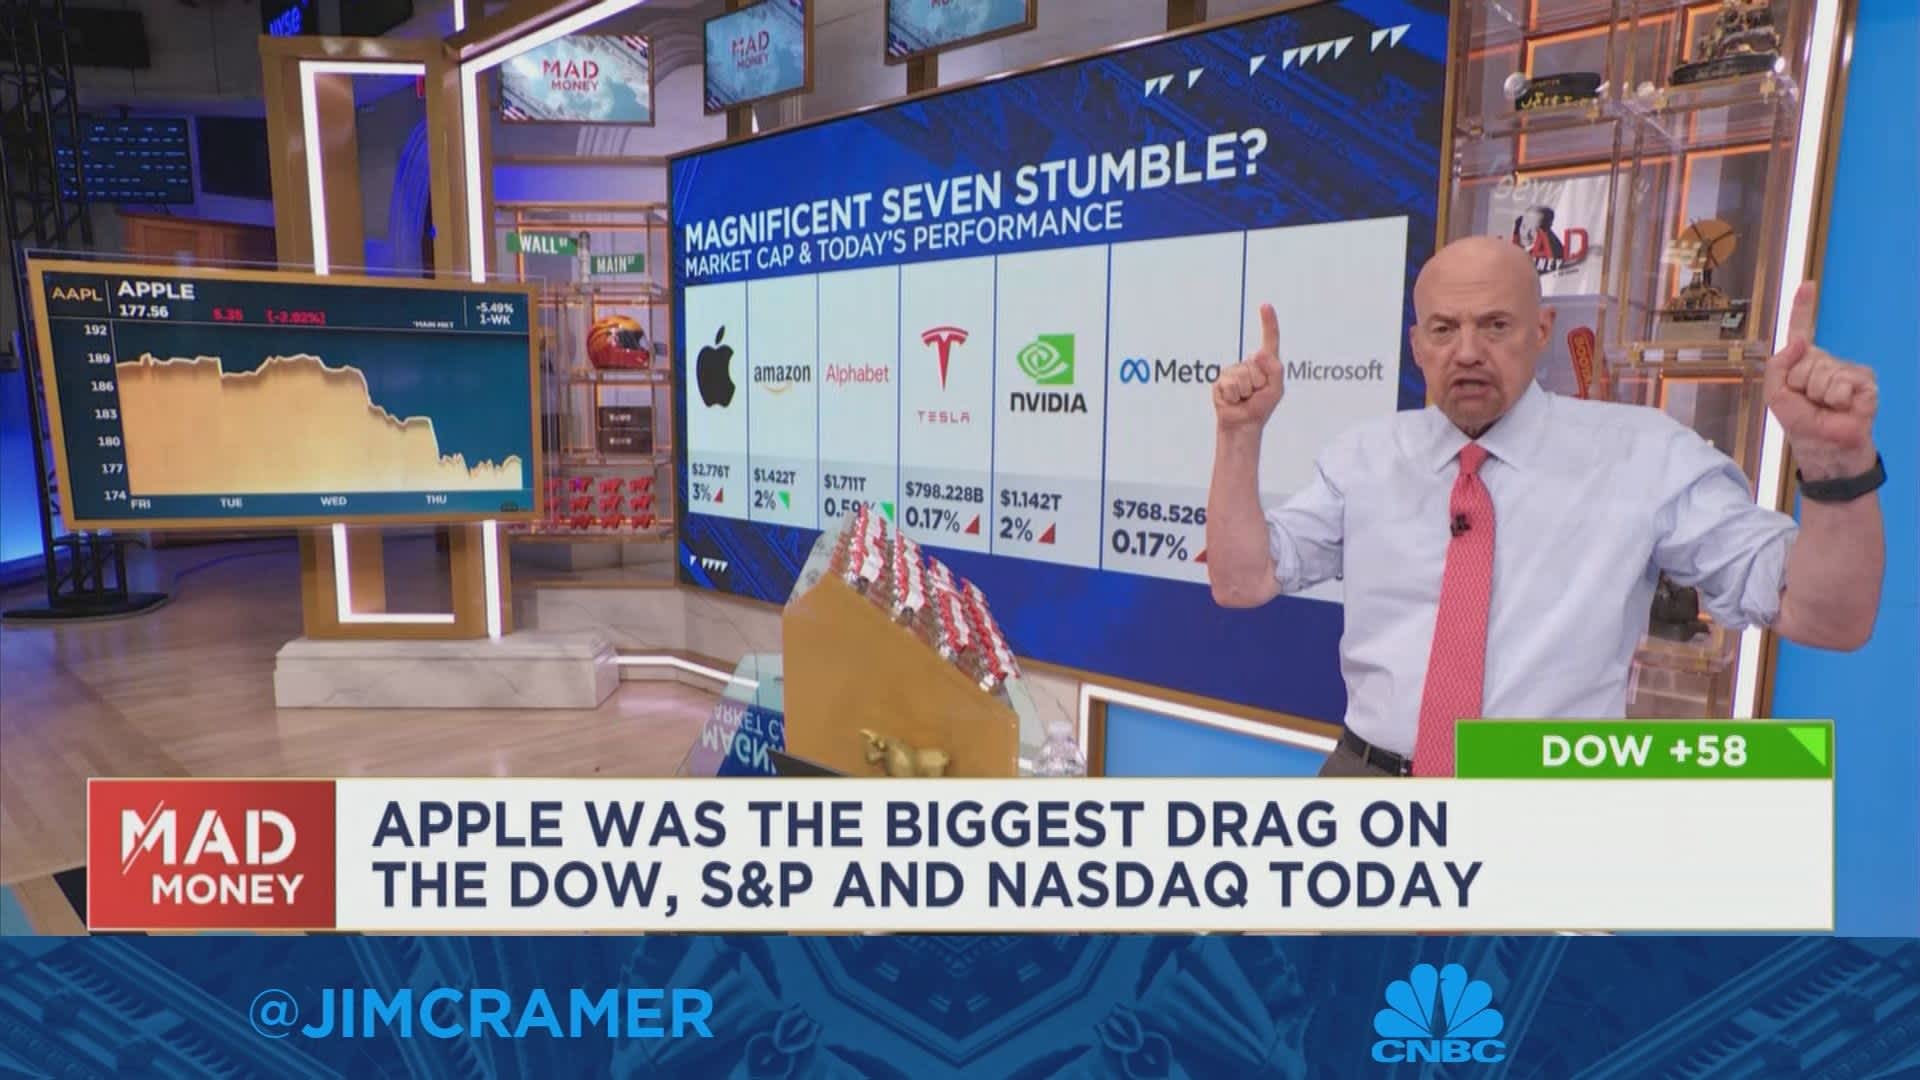 Mega caps have suddenly gone out of style at the Nasdaq, says Jim Cramer